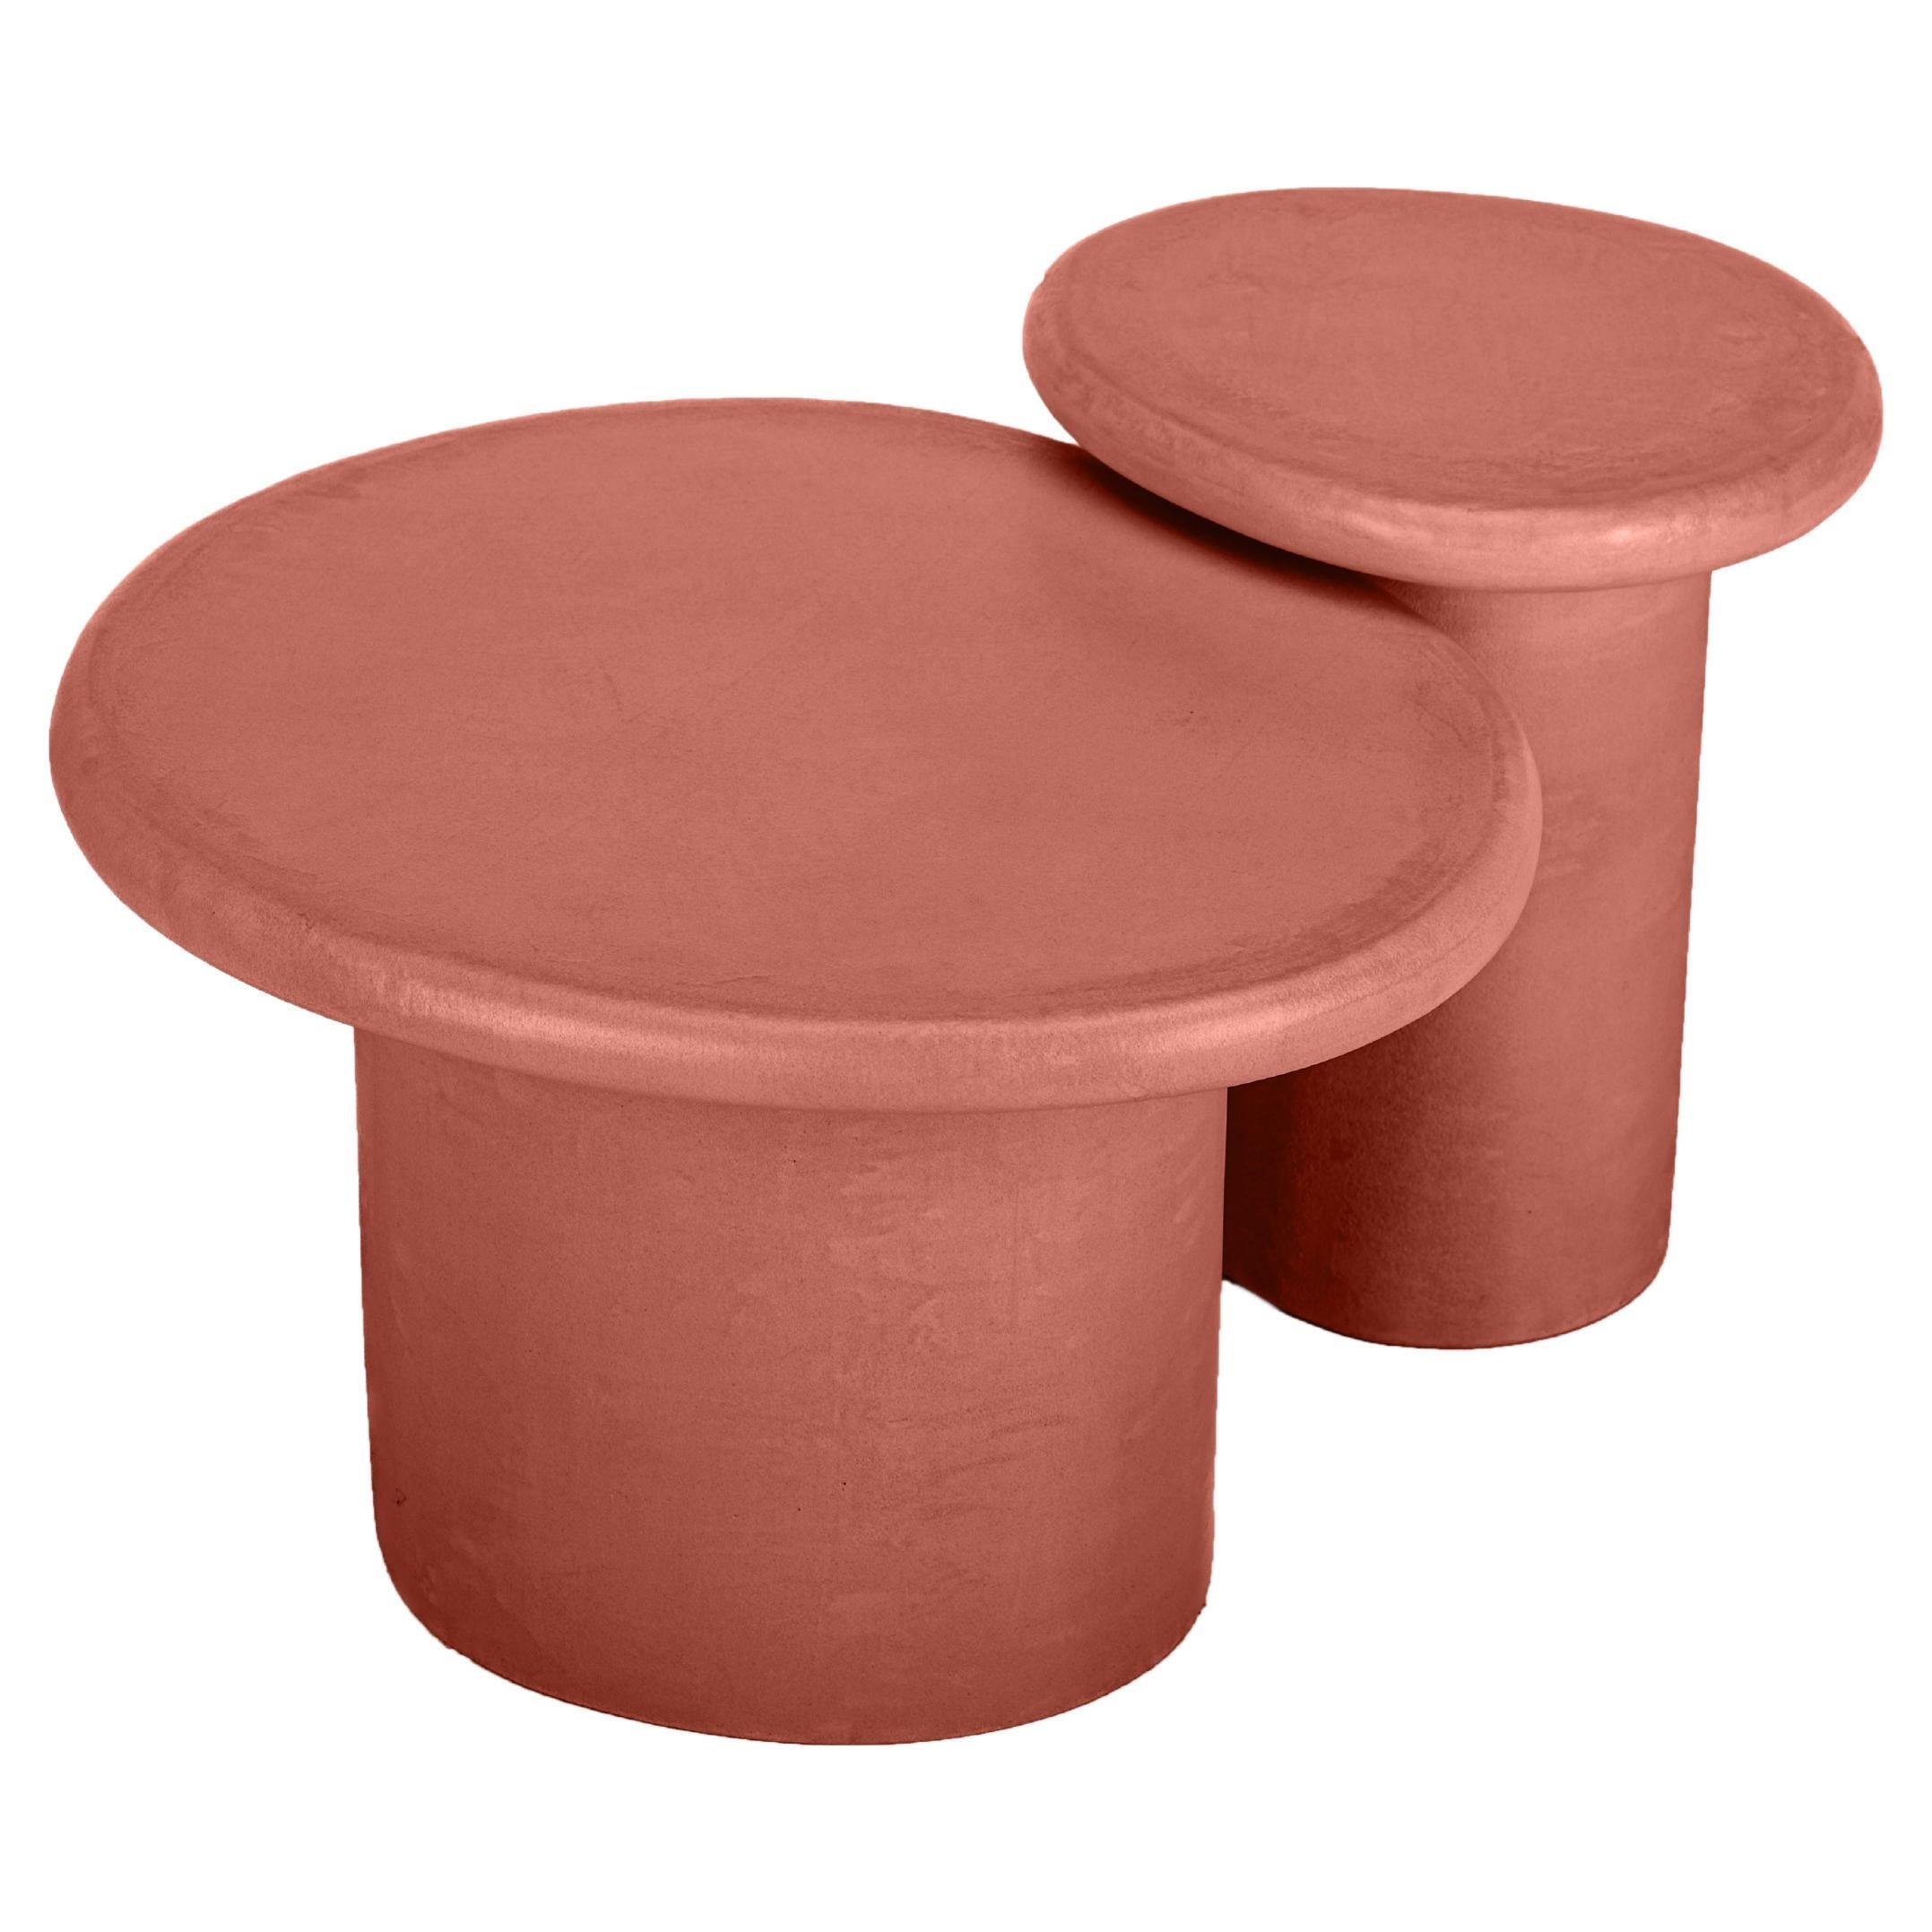 Organic Shaped Mortex Coffee Table Set "Sami" BM15 by Isabelle Beaumont